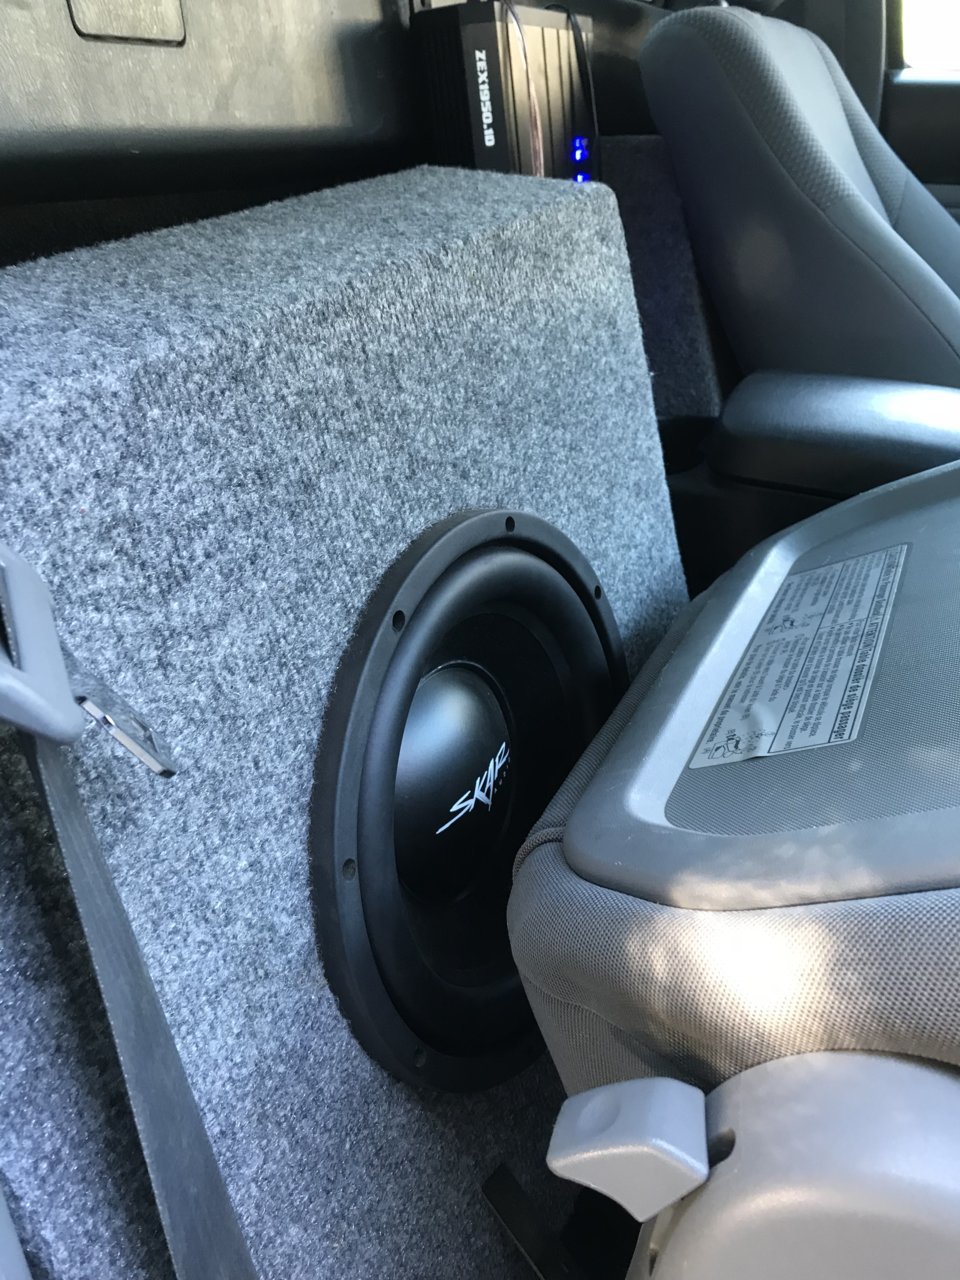 Compatible with 2005-2015 Toyota Tacoma Double Cab Truck Alpine Type S S-W10D2 Dual 10 Rhino Coated Sub Box Enclosure Final 2 Ohm 